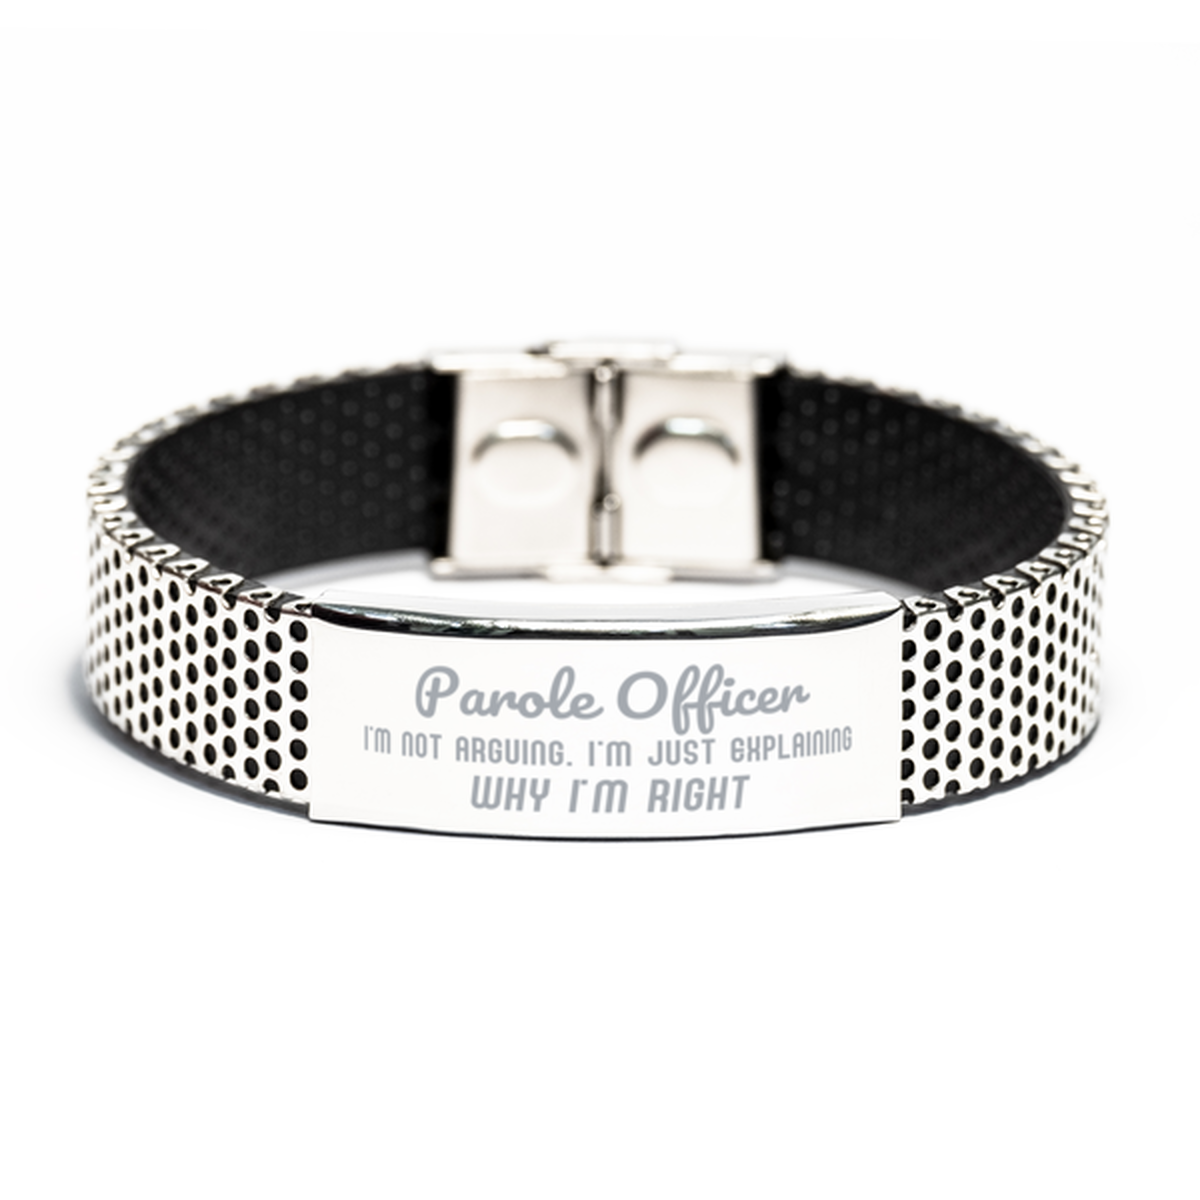 Parole Officer I'm not Arguing. I'm Just Explaining Why I'm RIGHT Stainless Steel Bracelet, Funny Saying Quote Parole Officer Gifts For Parole Officer Graduation Birthday Christmas Gifts for Men Women Coworker